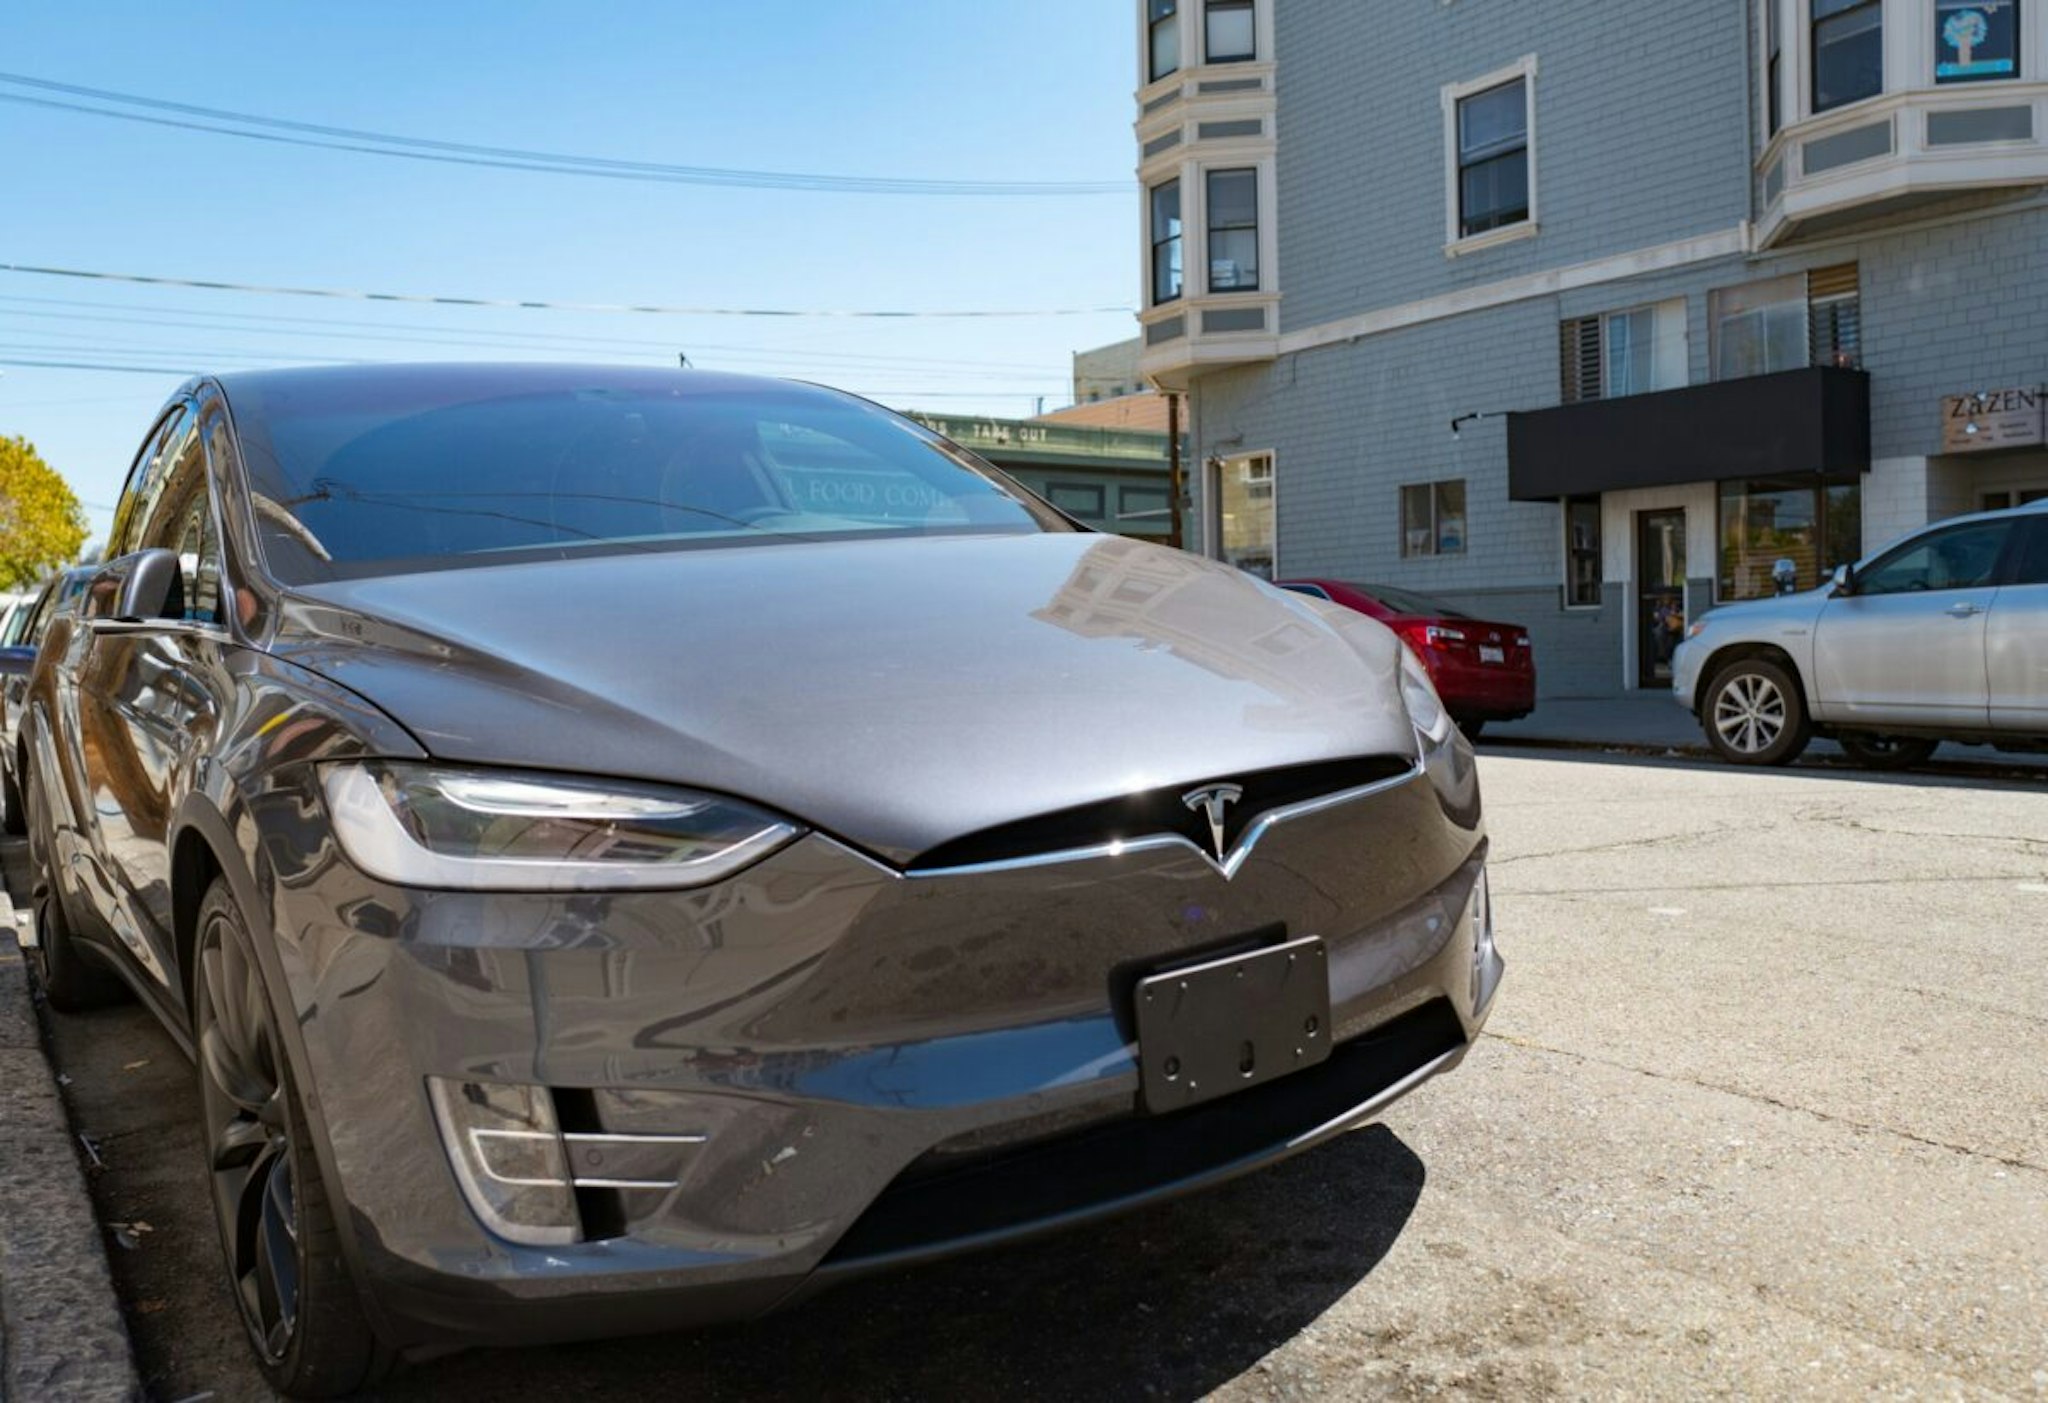 Model X suv by Tesla Motors parked on a side street in the Cow Hollow neighborhood of San Francisco, California, August 28, 2016